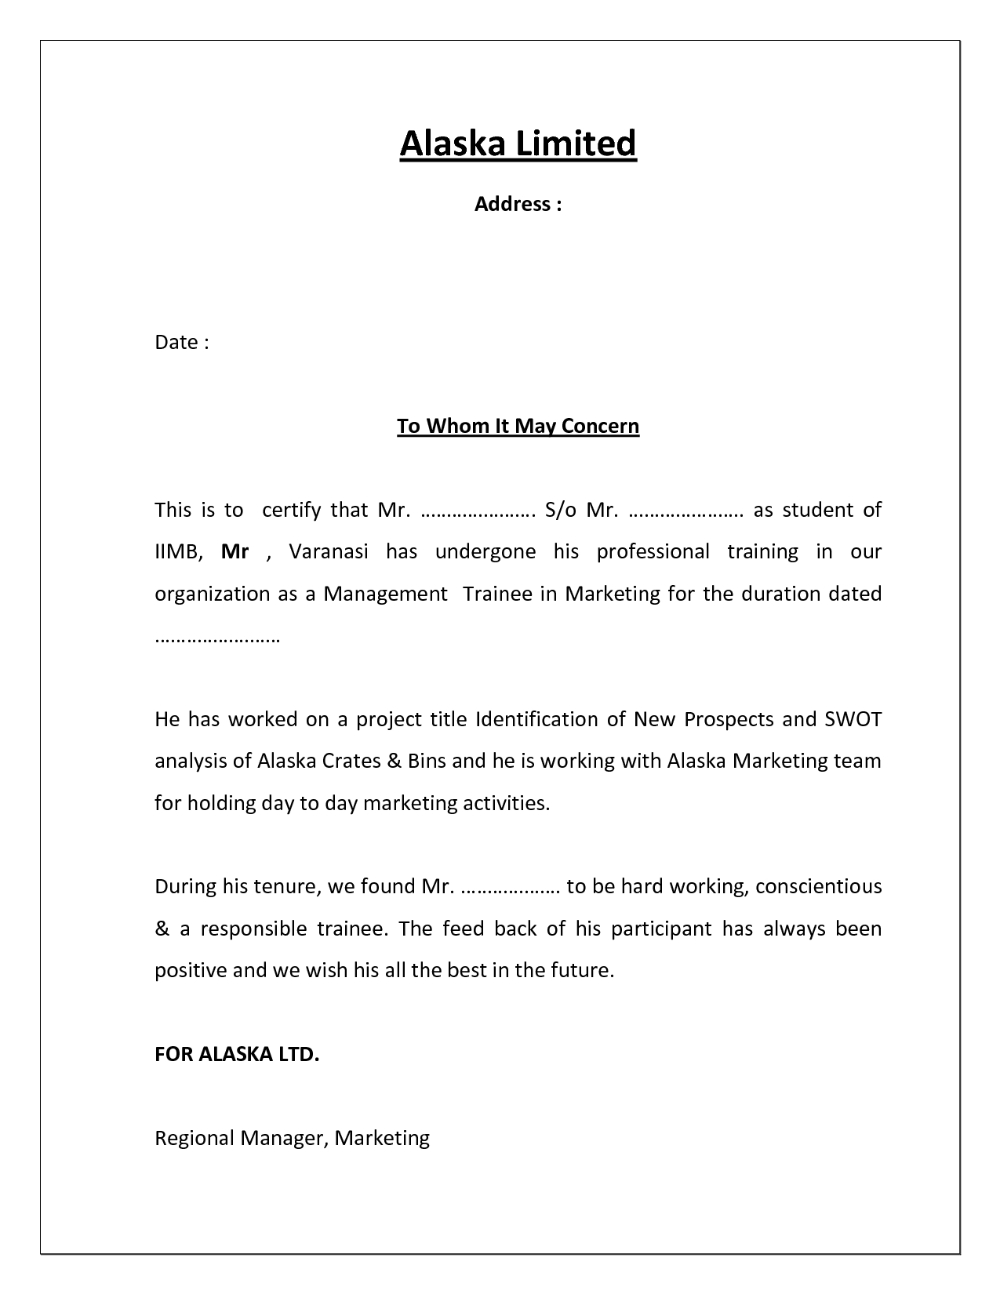 Certificate Template For Project Completion | Certificate Of Completion with regard to Certificate Template For Project Completion